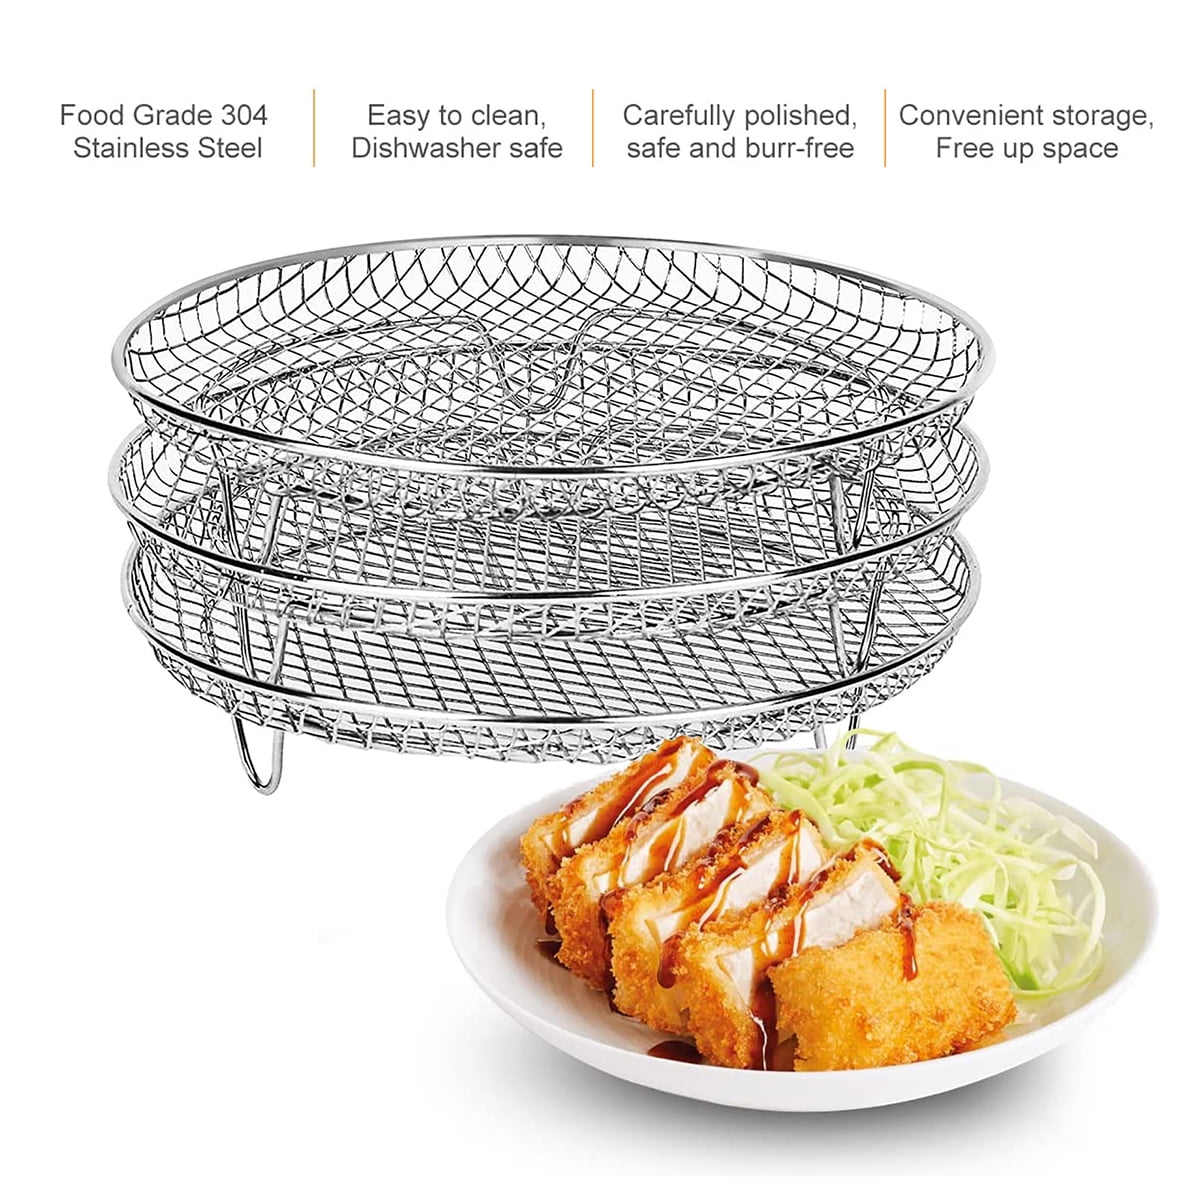 Large Air Fryer Oven & Dehydrator | Stainless Steel | Oil-Less Cooking |  Dual Element 360° Turbo Heat | Rotisserie Chicken Fork & Rotating Basket 